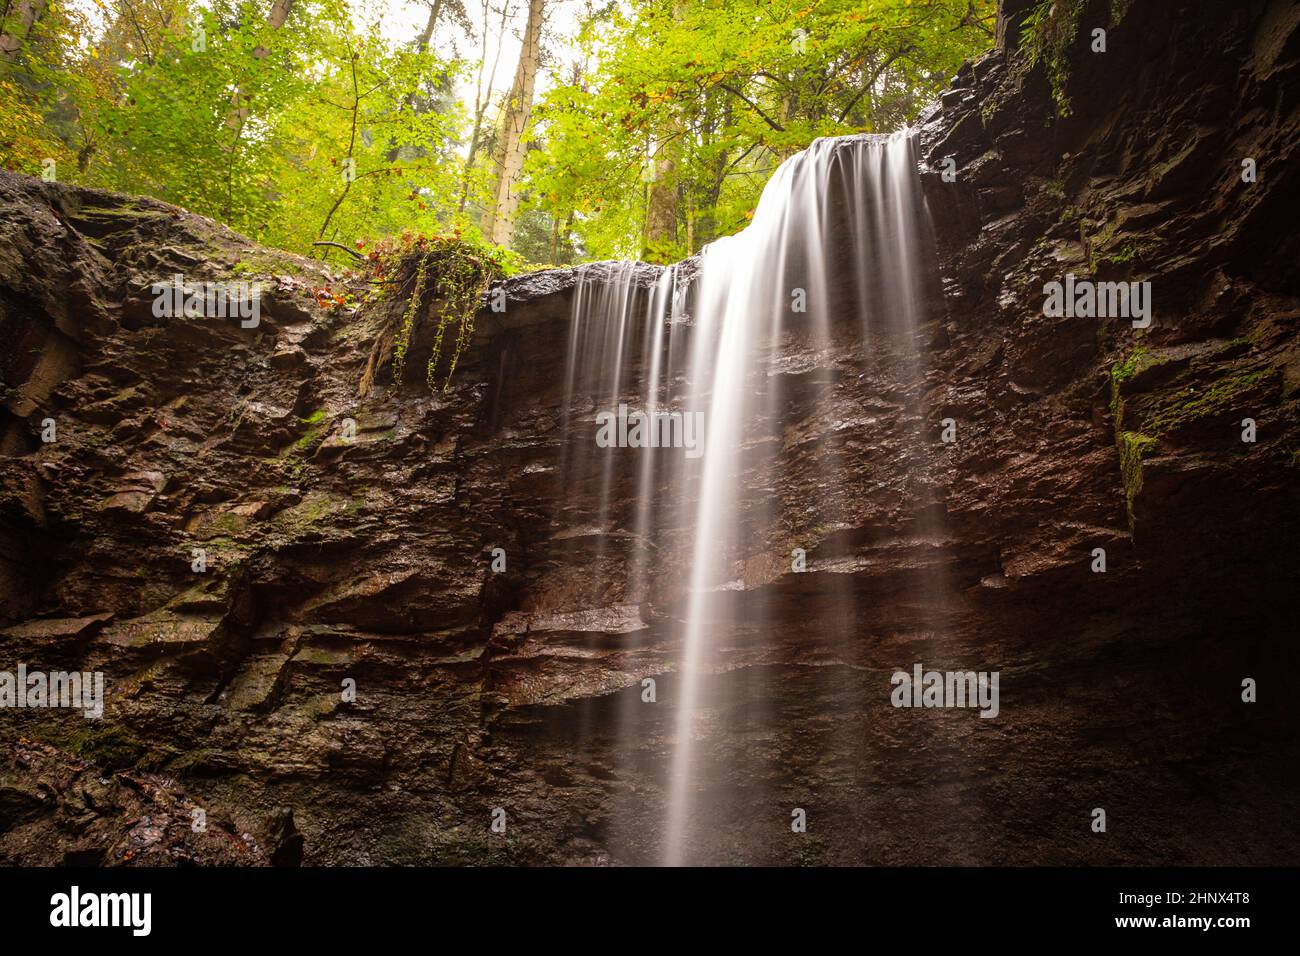 Waterfall cascade is flowing over a rock in a forest Stock Photo